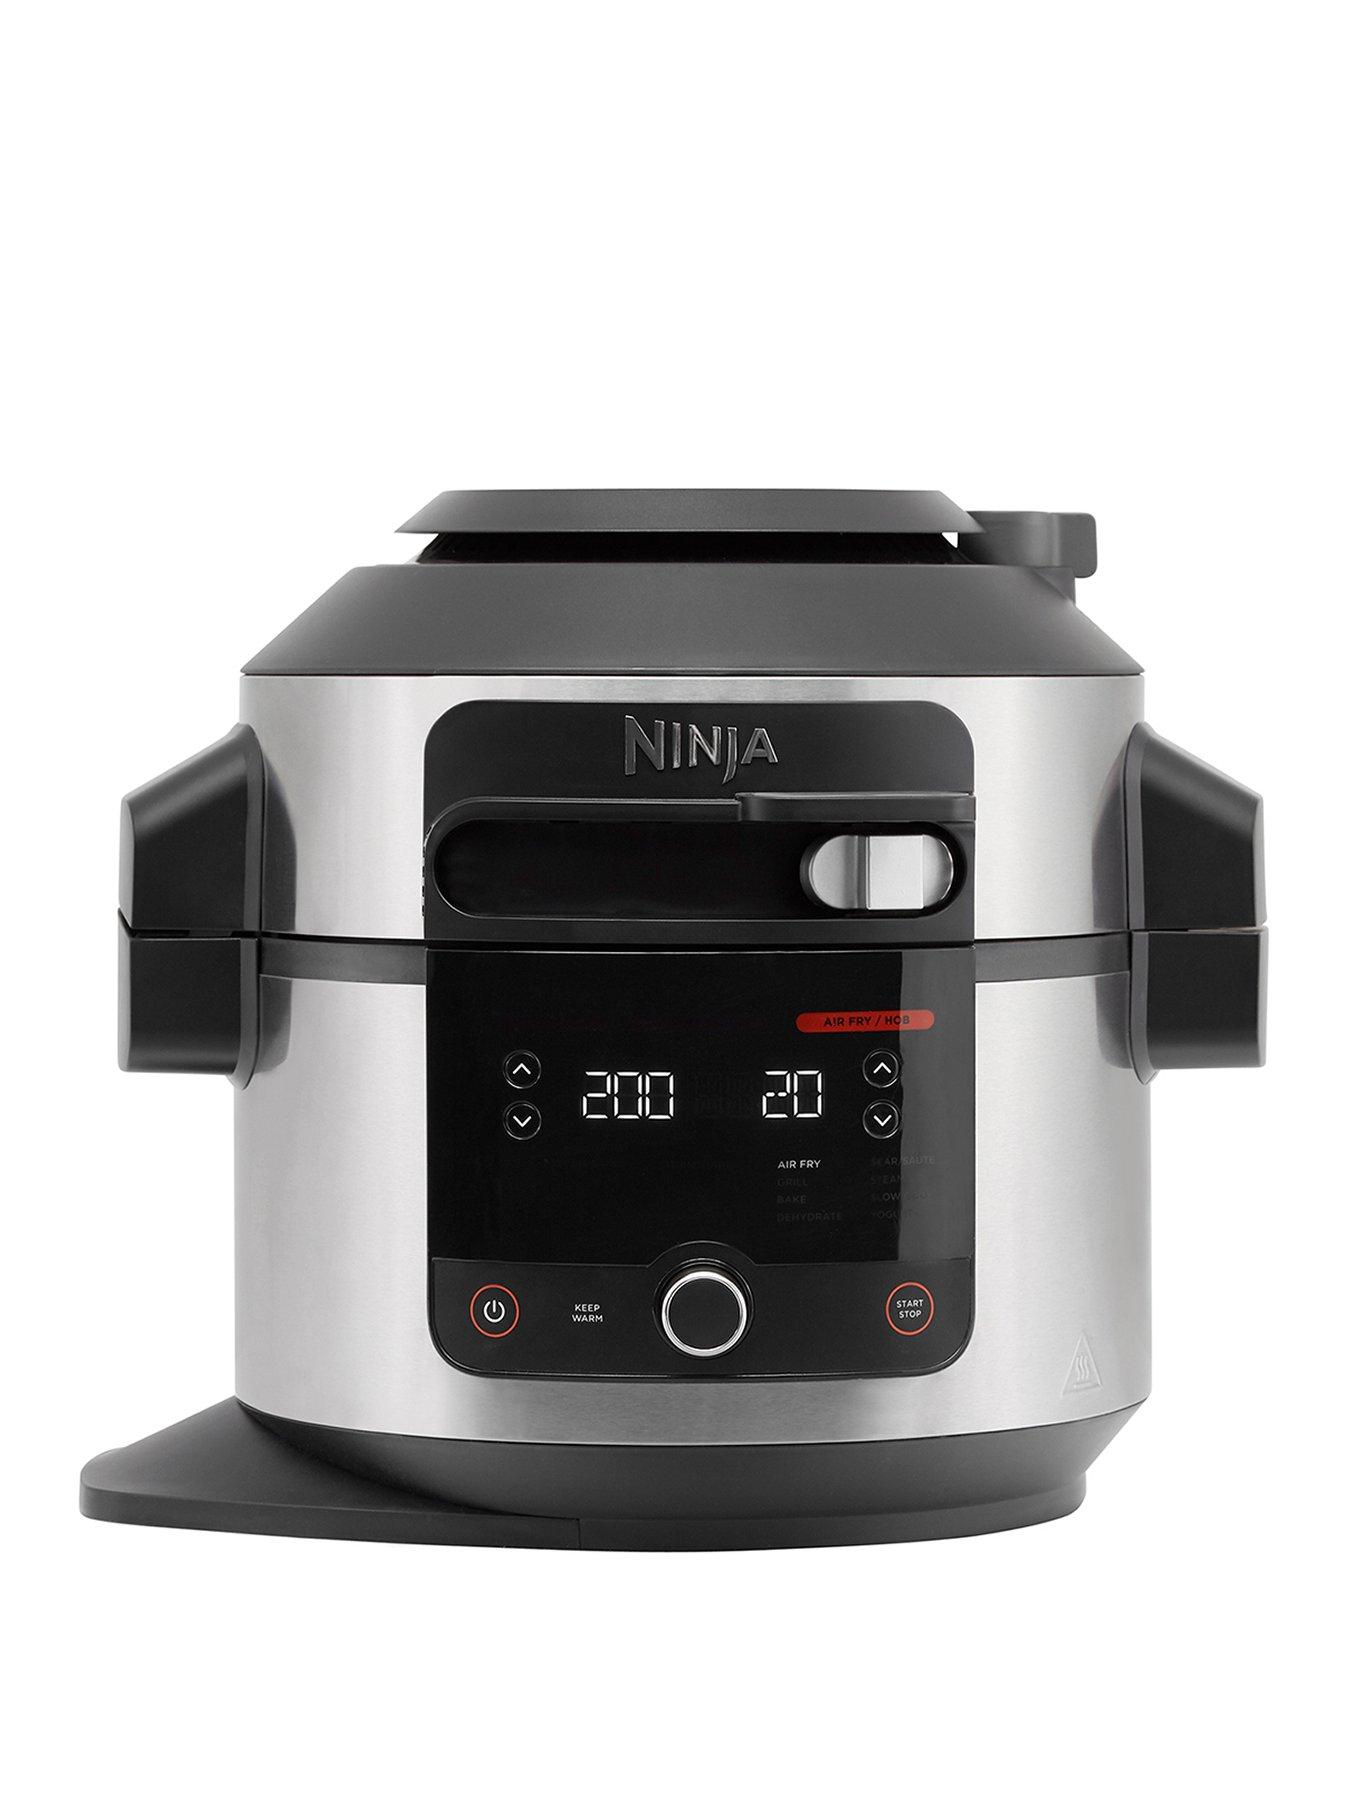 Instant Pot's 8-qt. Pro model 10-in-1 Multi-Cooker now matching  low  at $110 (Reg. $150)